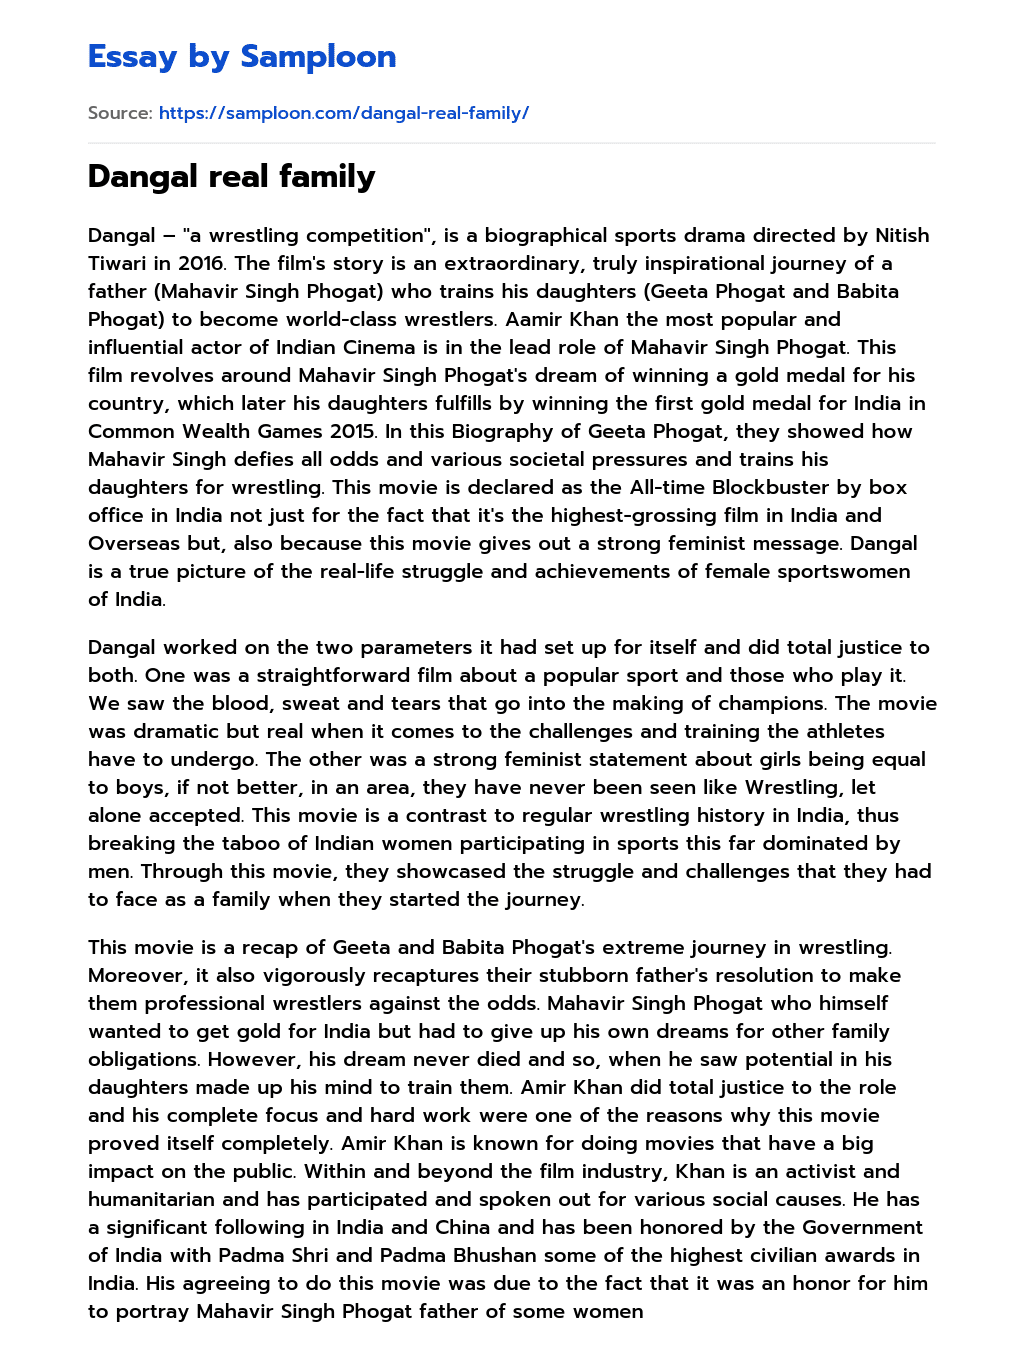 Dangal real family Review essay